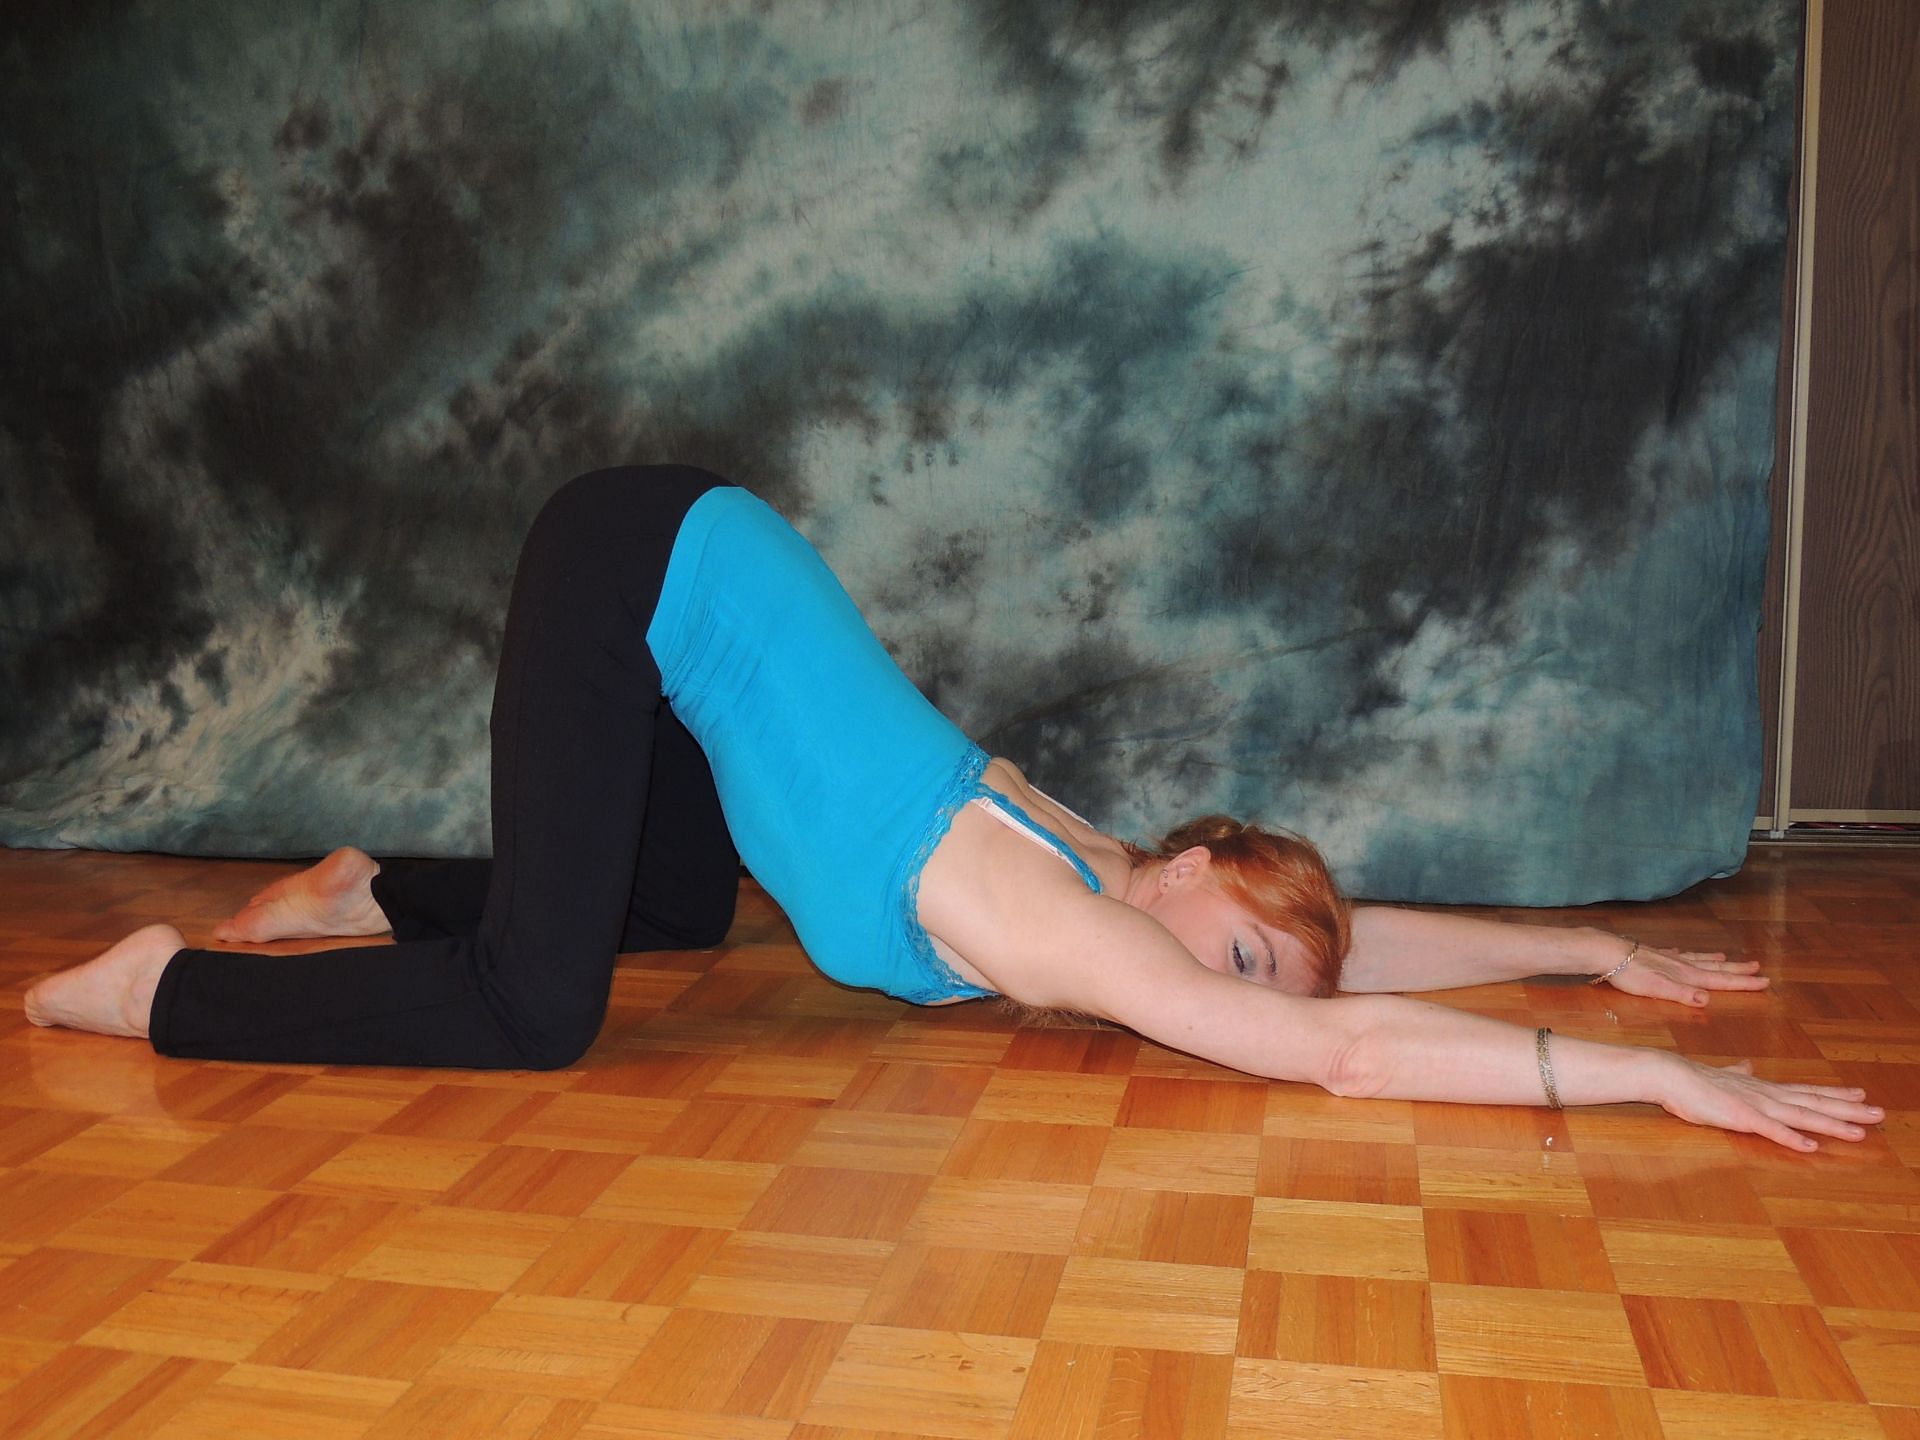 What is a cobra pose and its benefits? - Quora